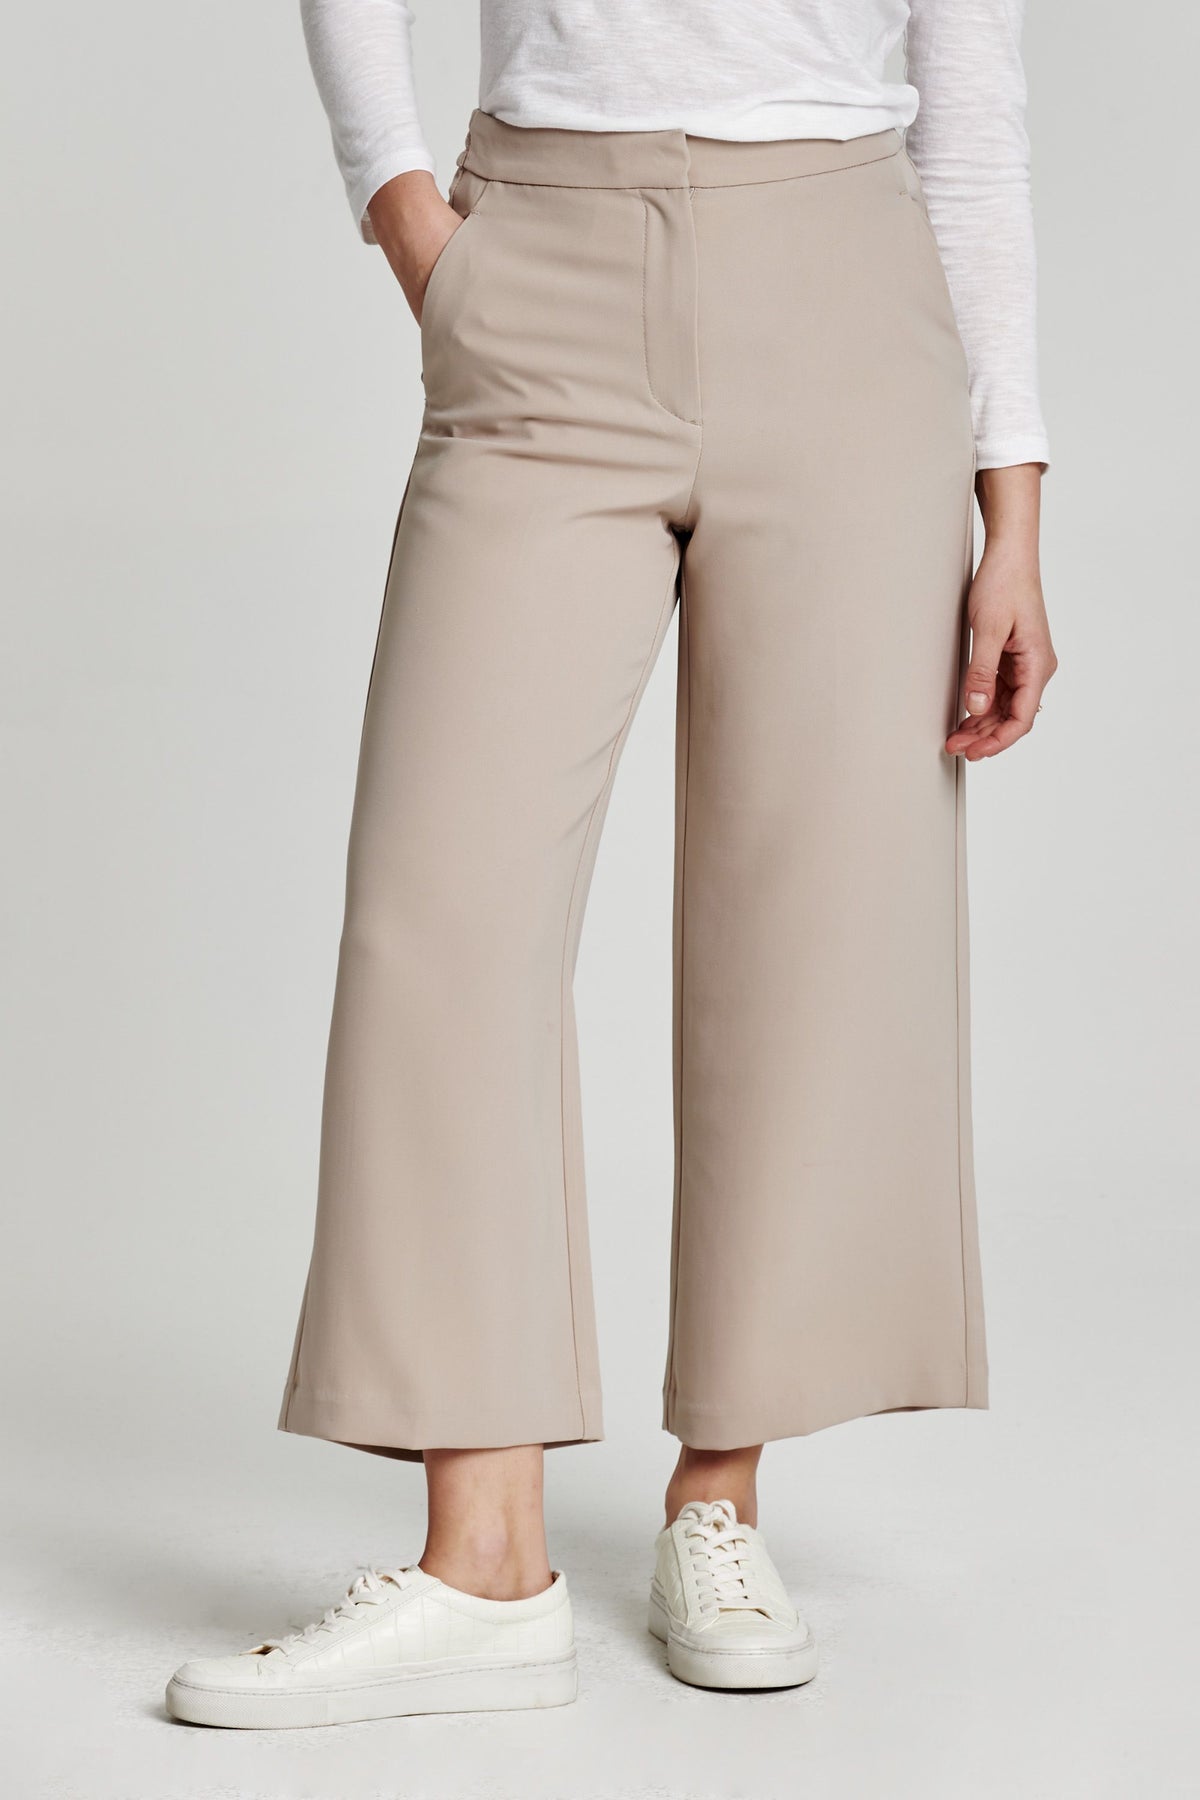 another love denali pant in cream